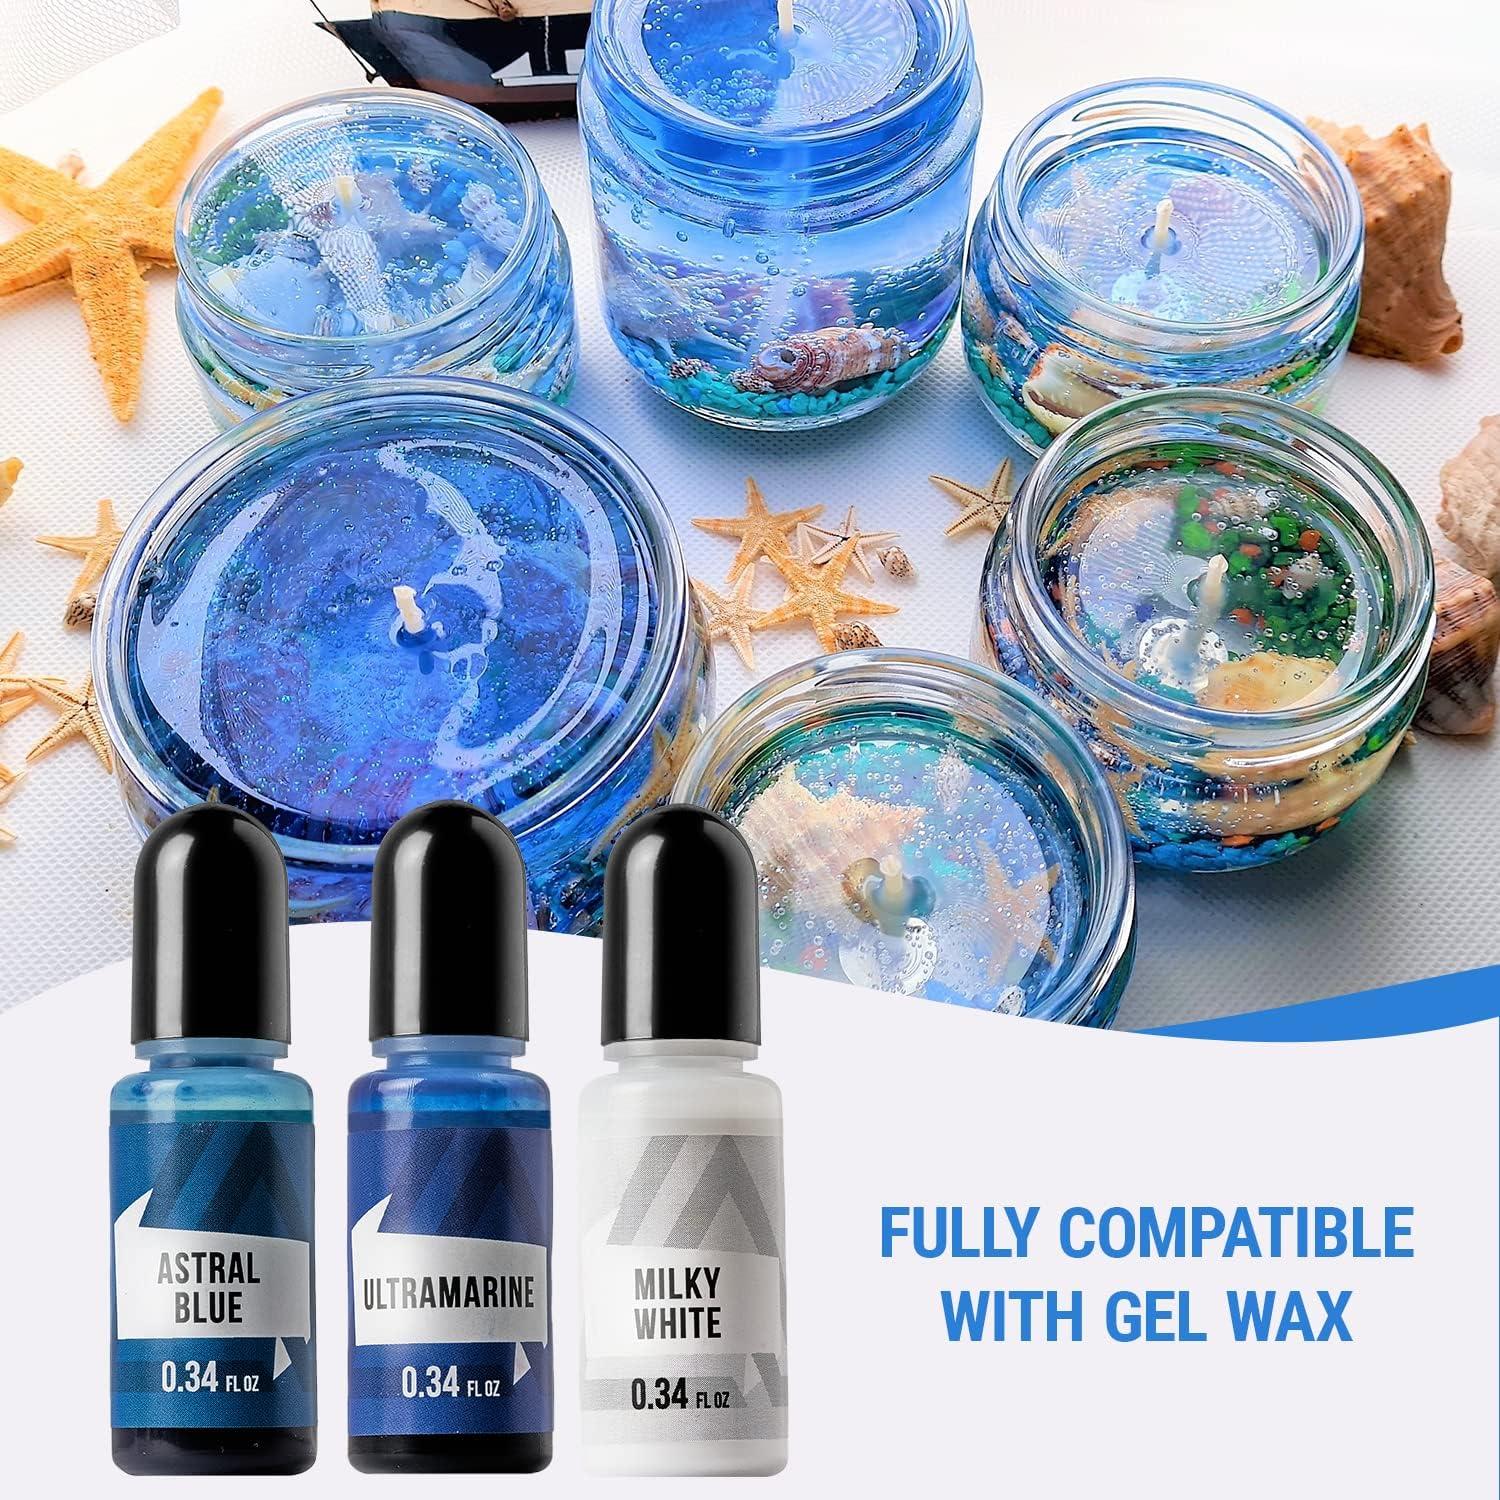 ALEXES Liquid Candle Dye for Candle Making Epoxy Resin Dye